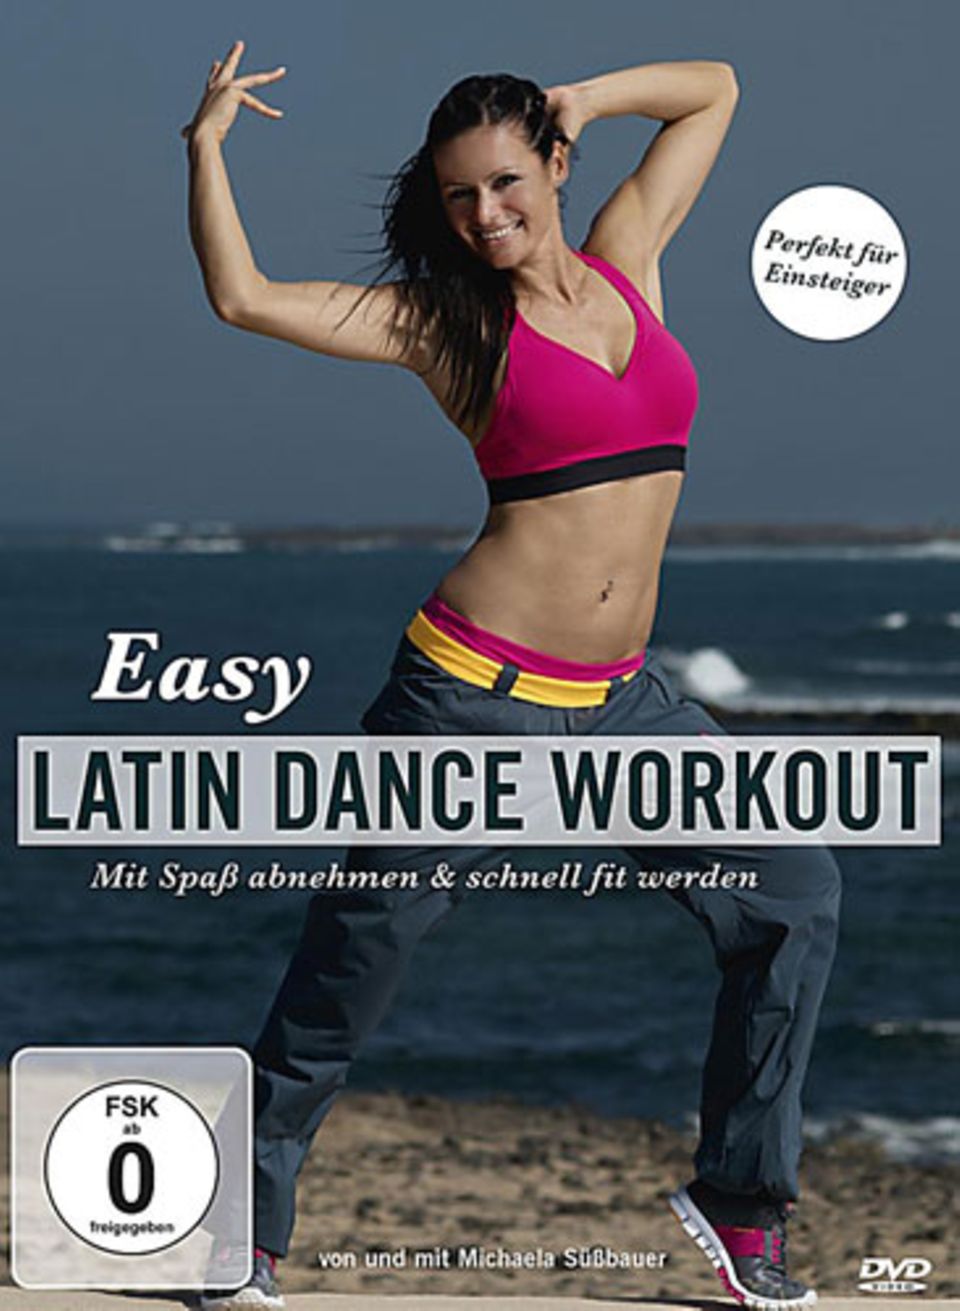 Easy Latin Dance Workout